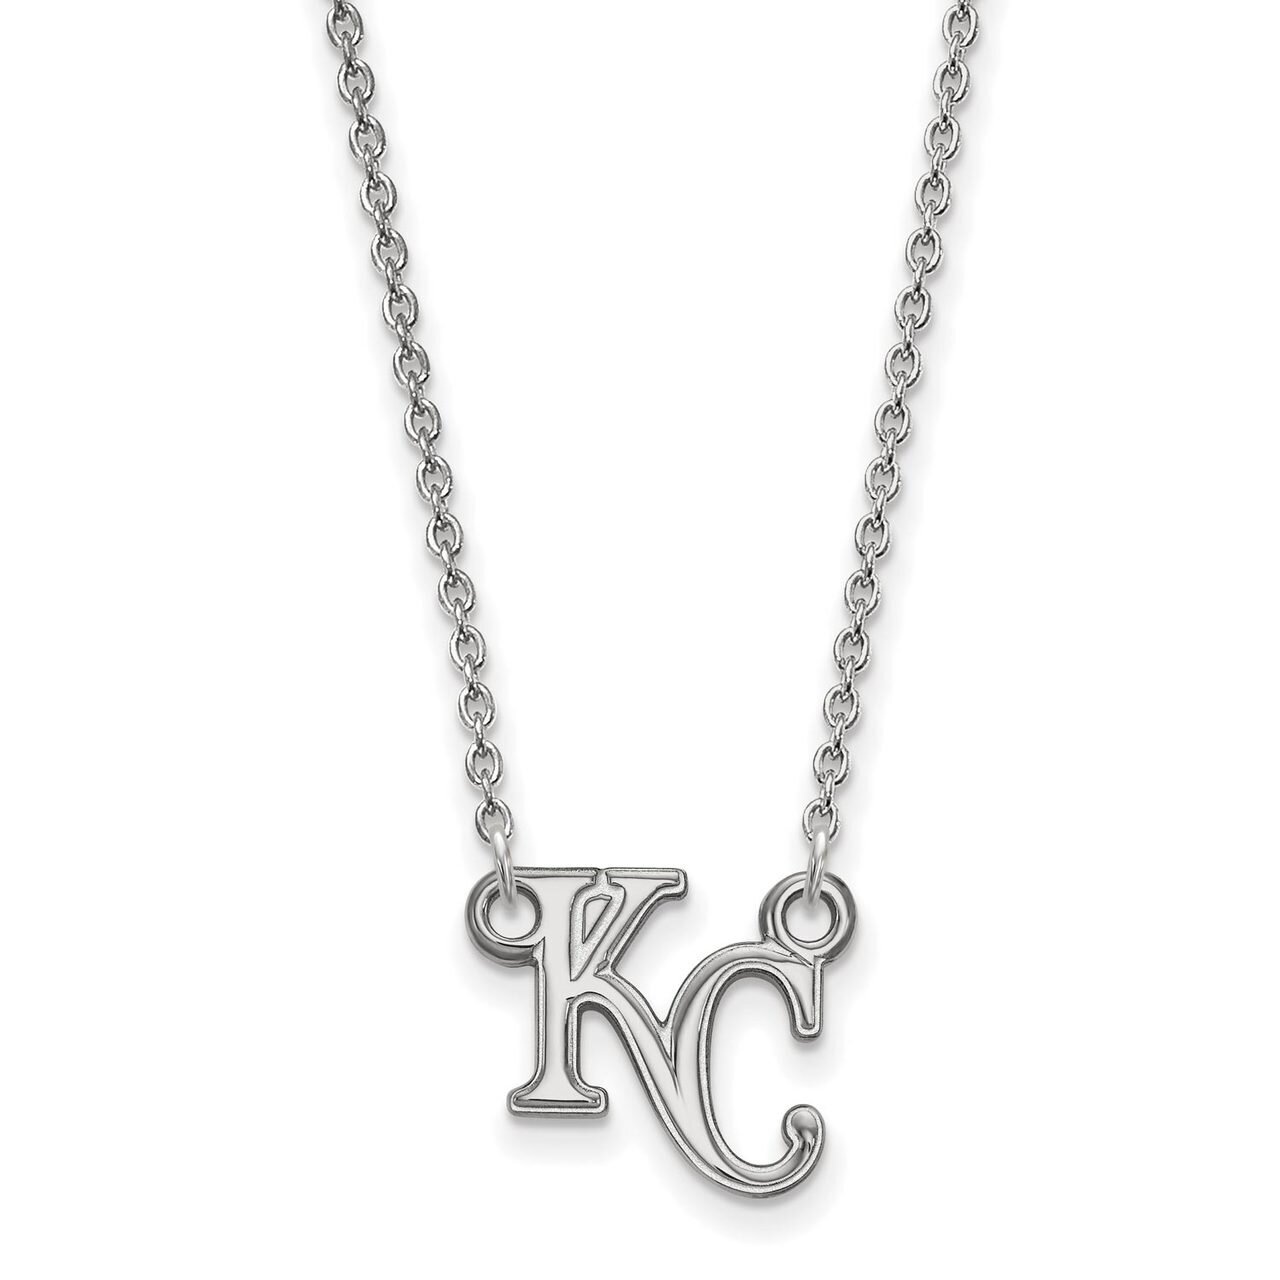 Kansas City Royals Small Pendant with Chain Necklace 10k White Gold 1W006ROY-18